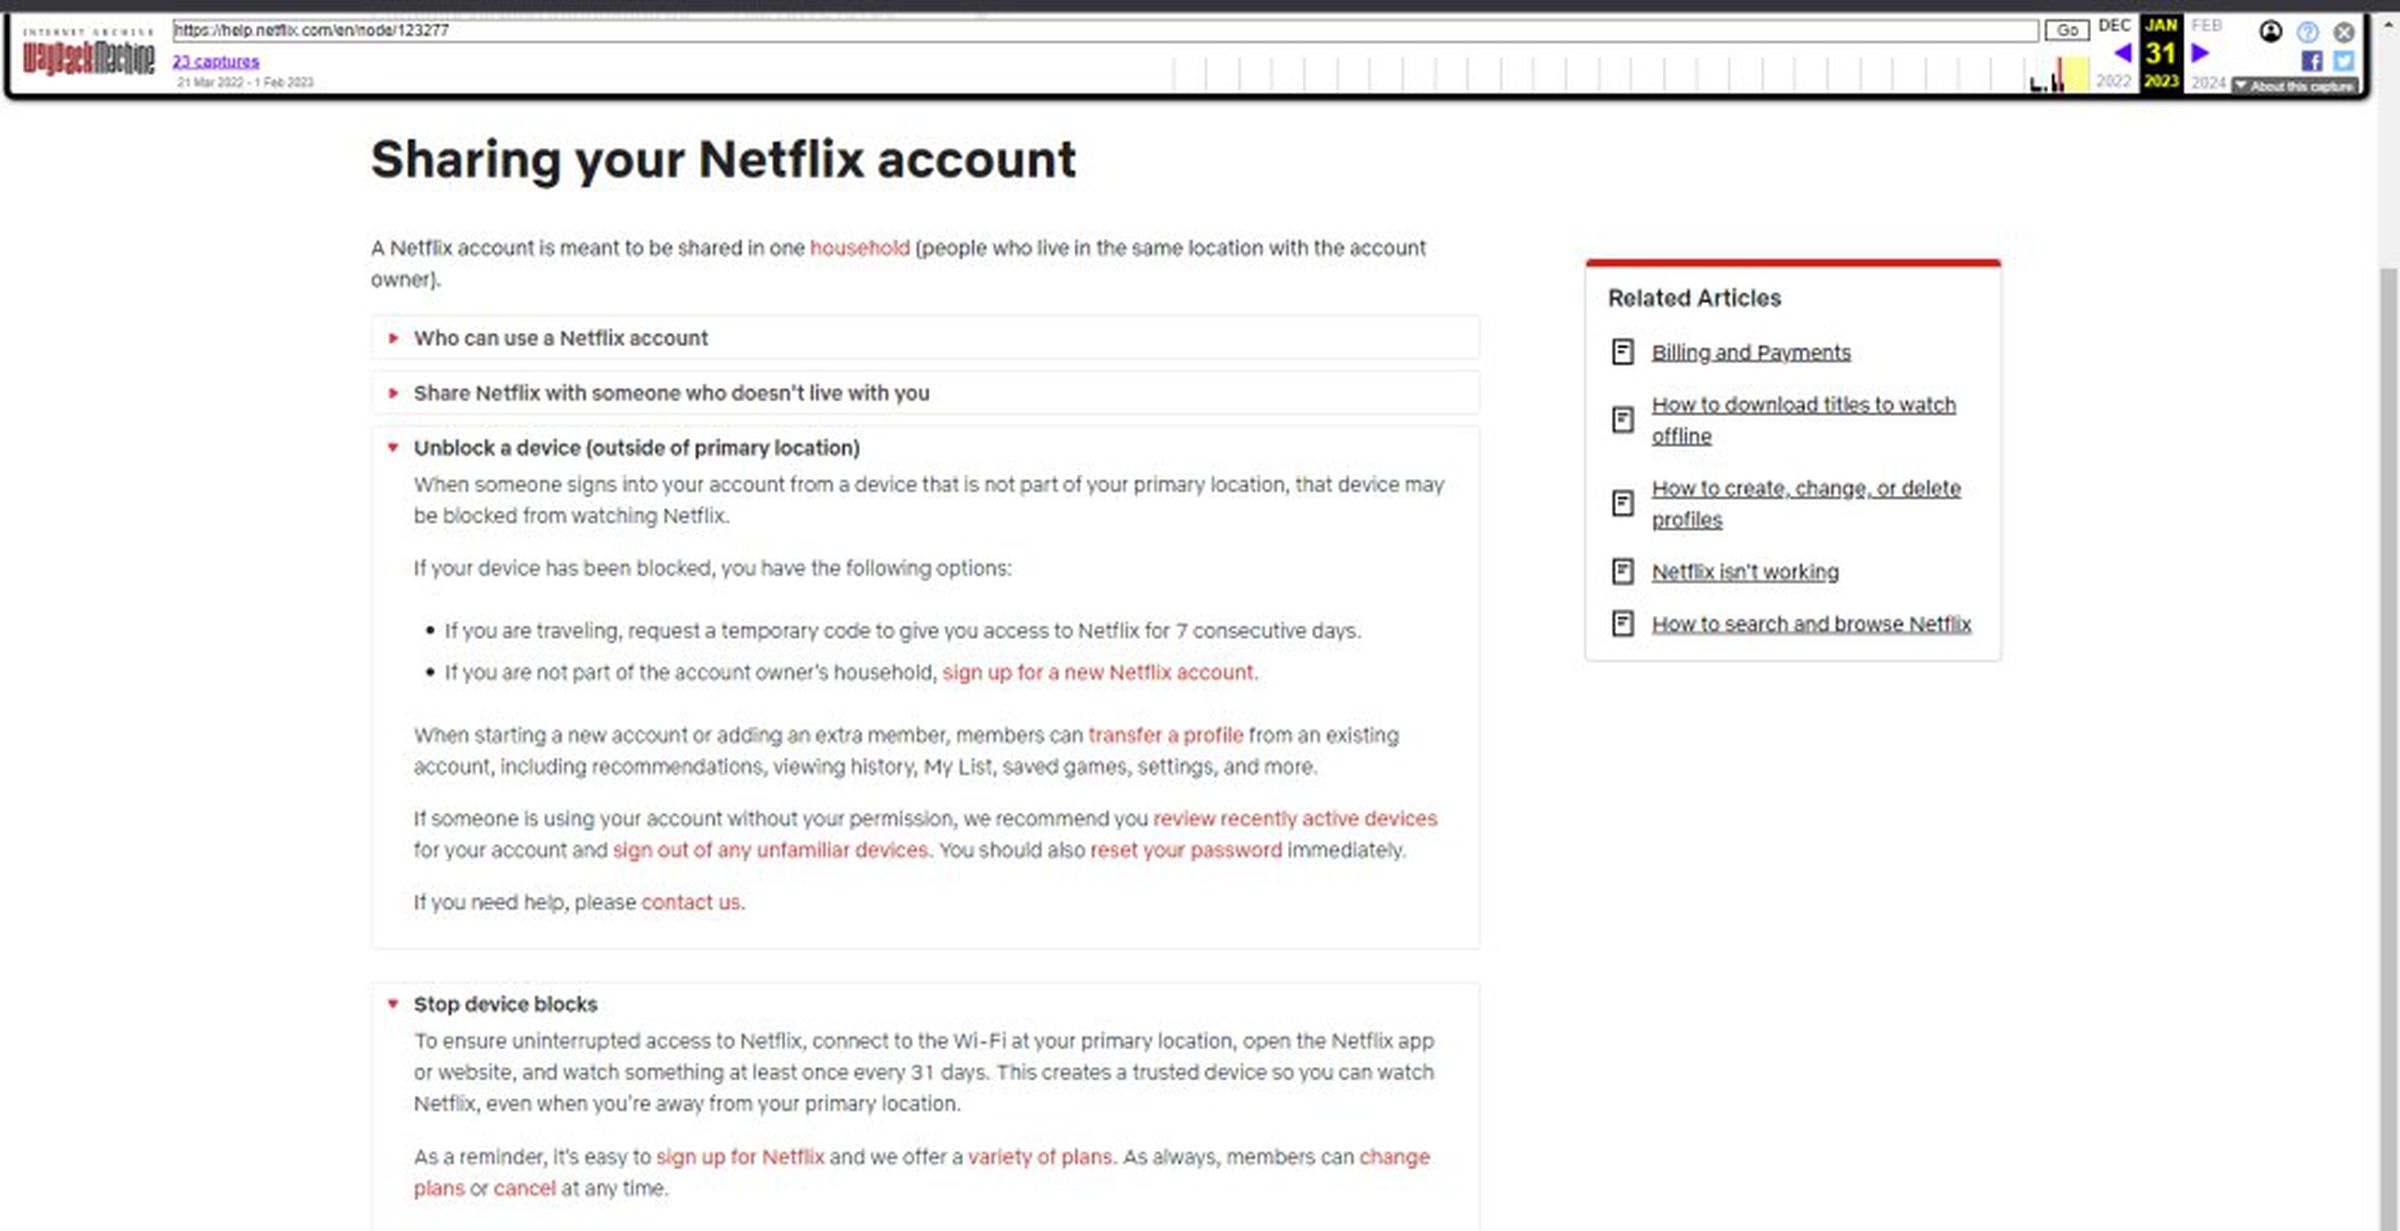 The archived support page says that Netflix can block a device 